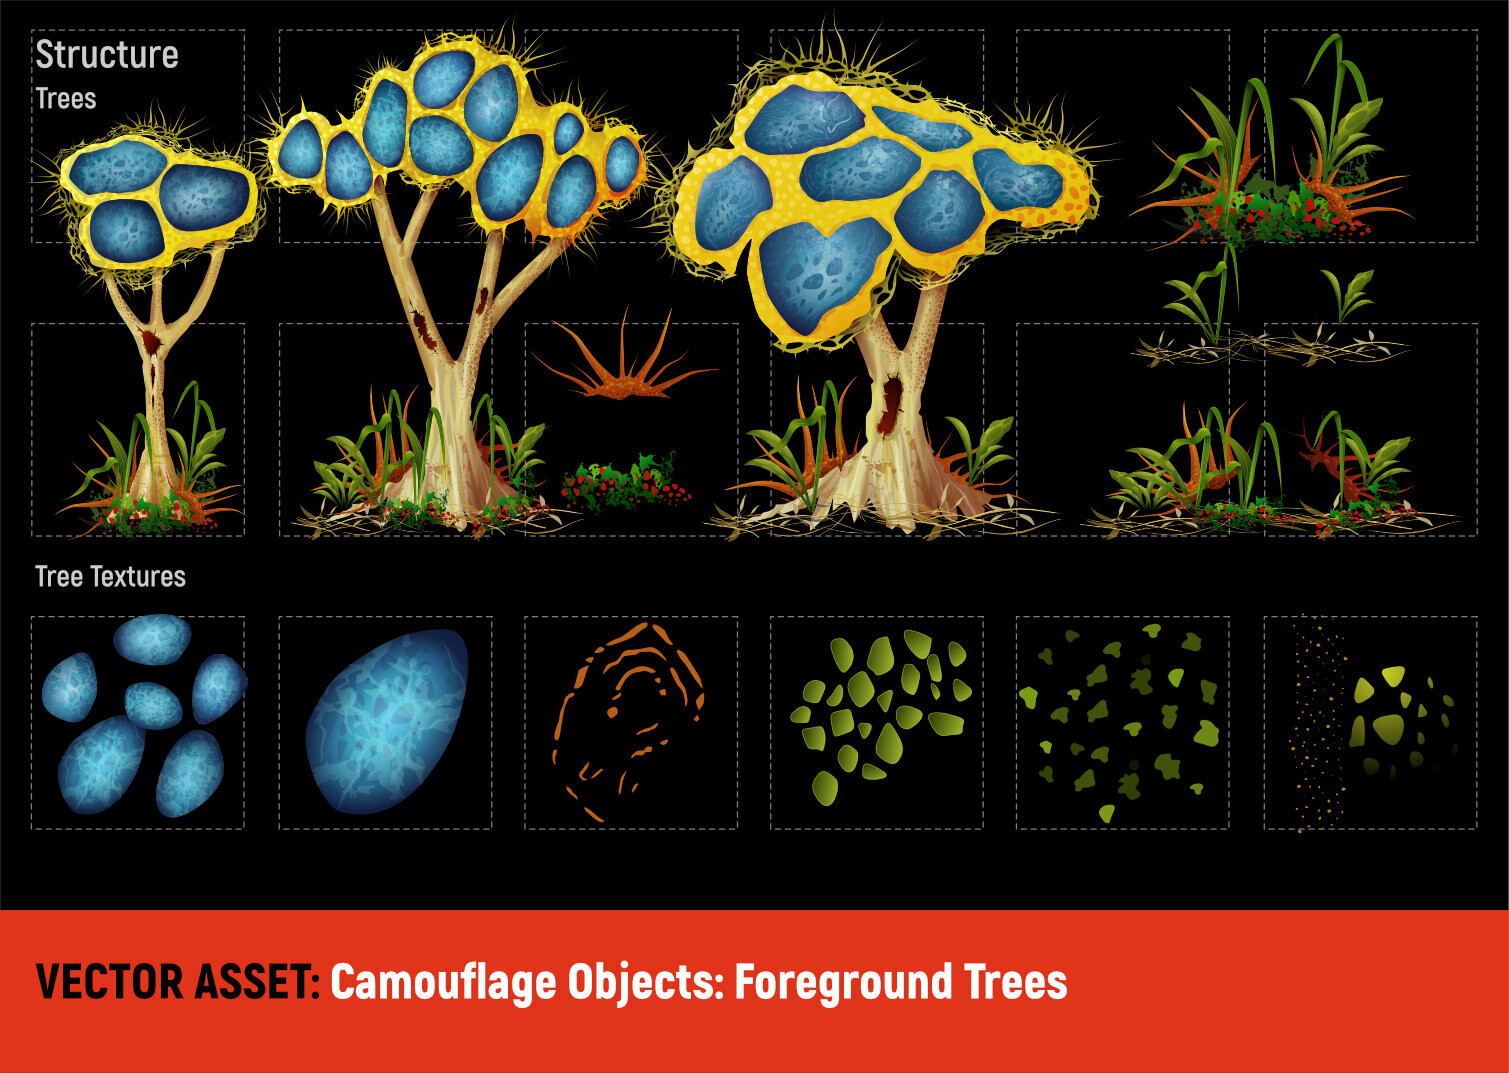 Vector Assets
Camouflage I Objects: Foreground Trees